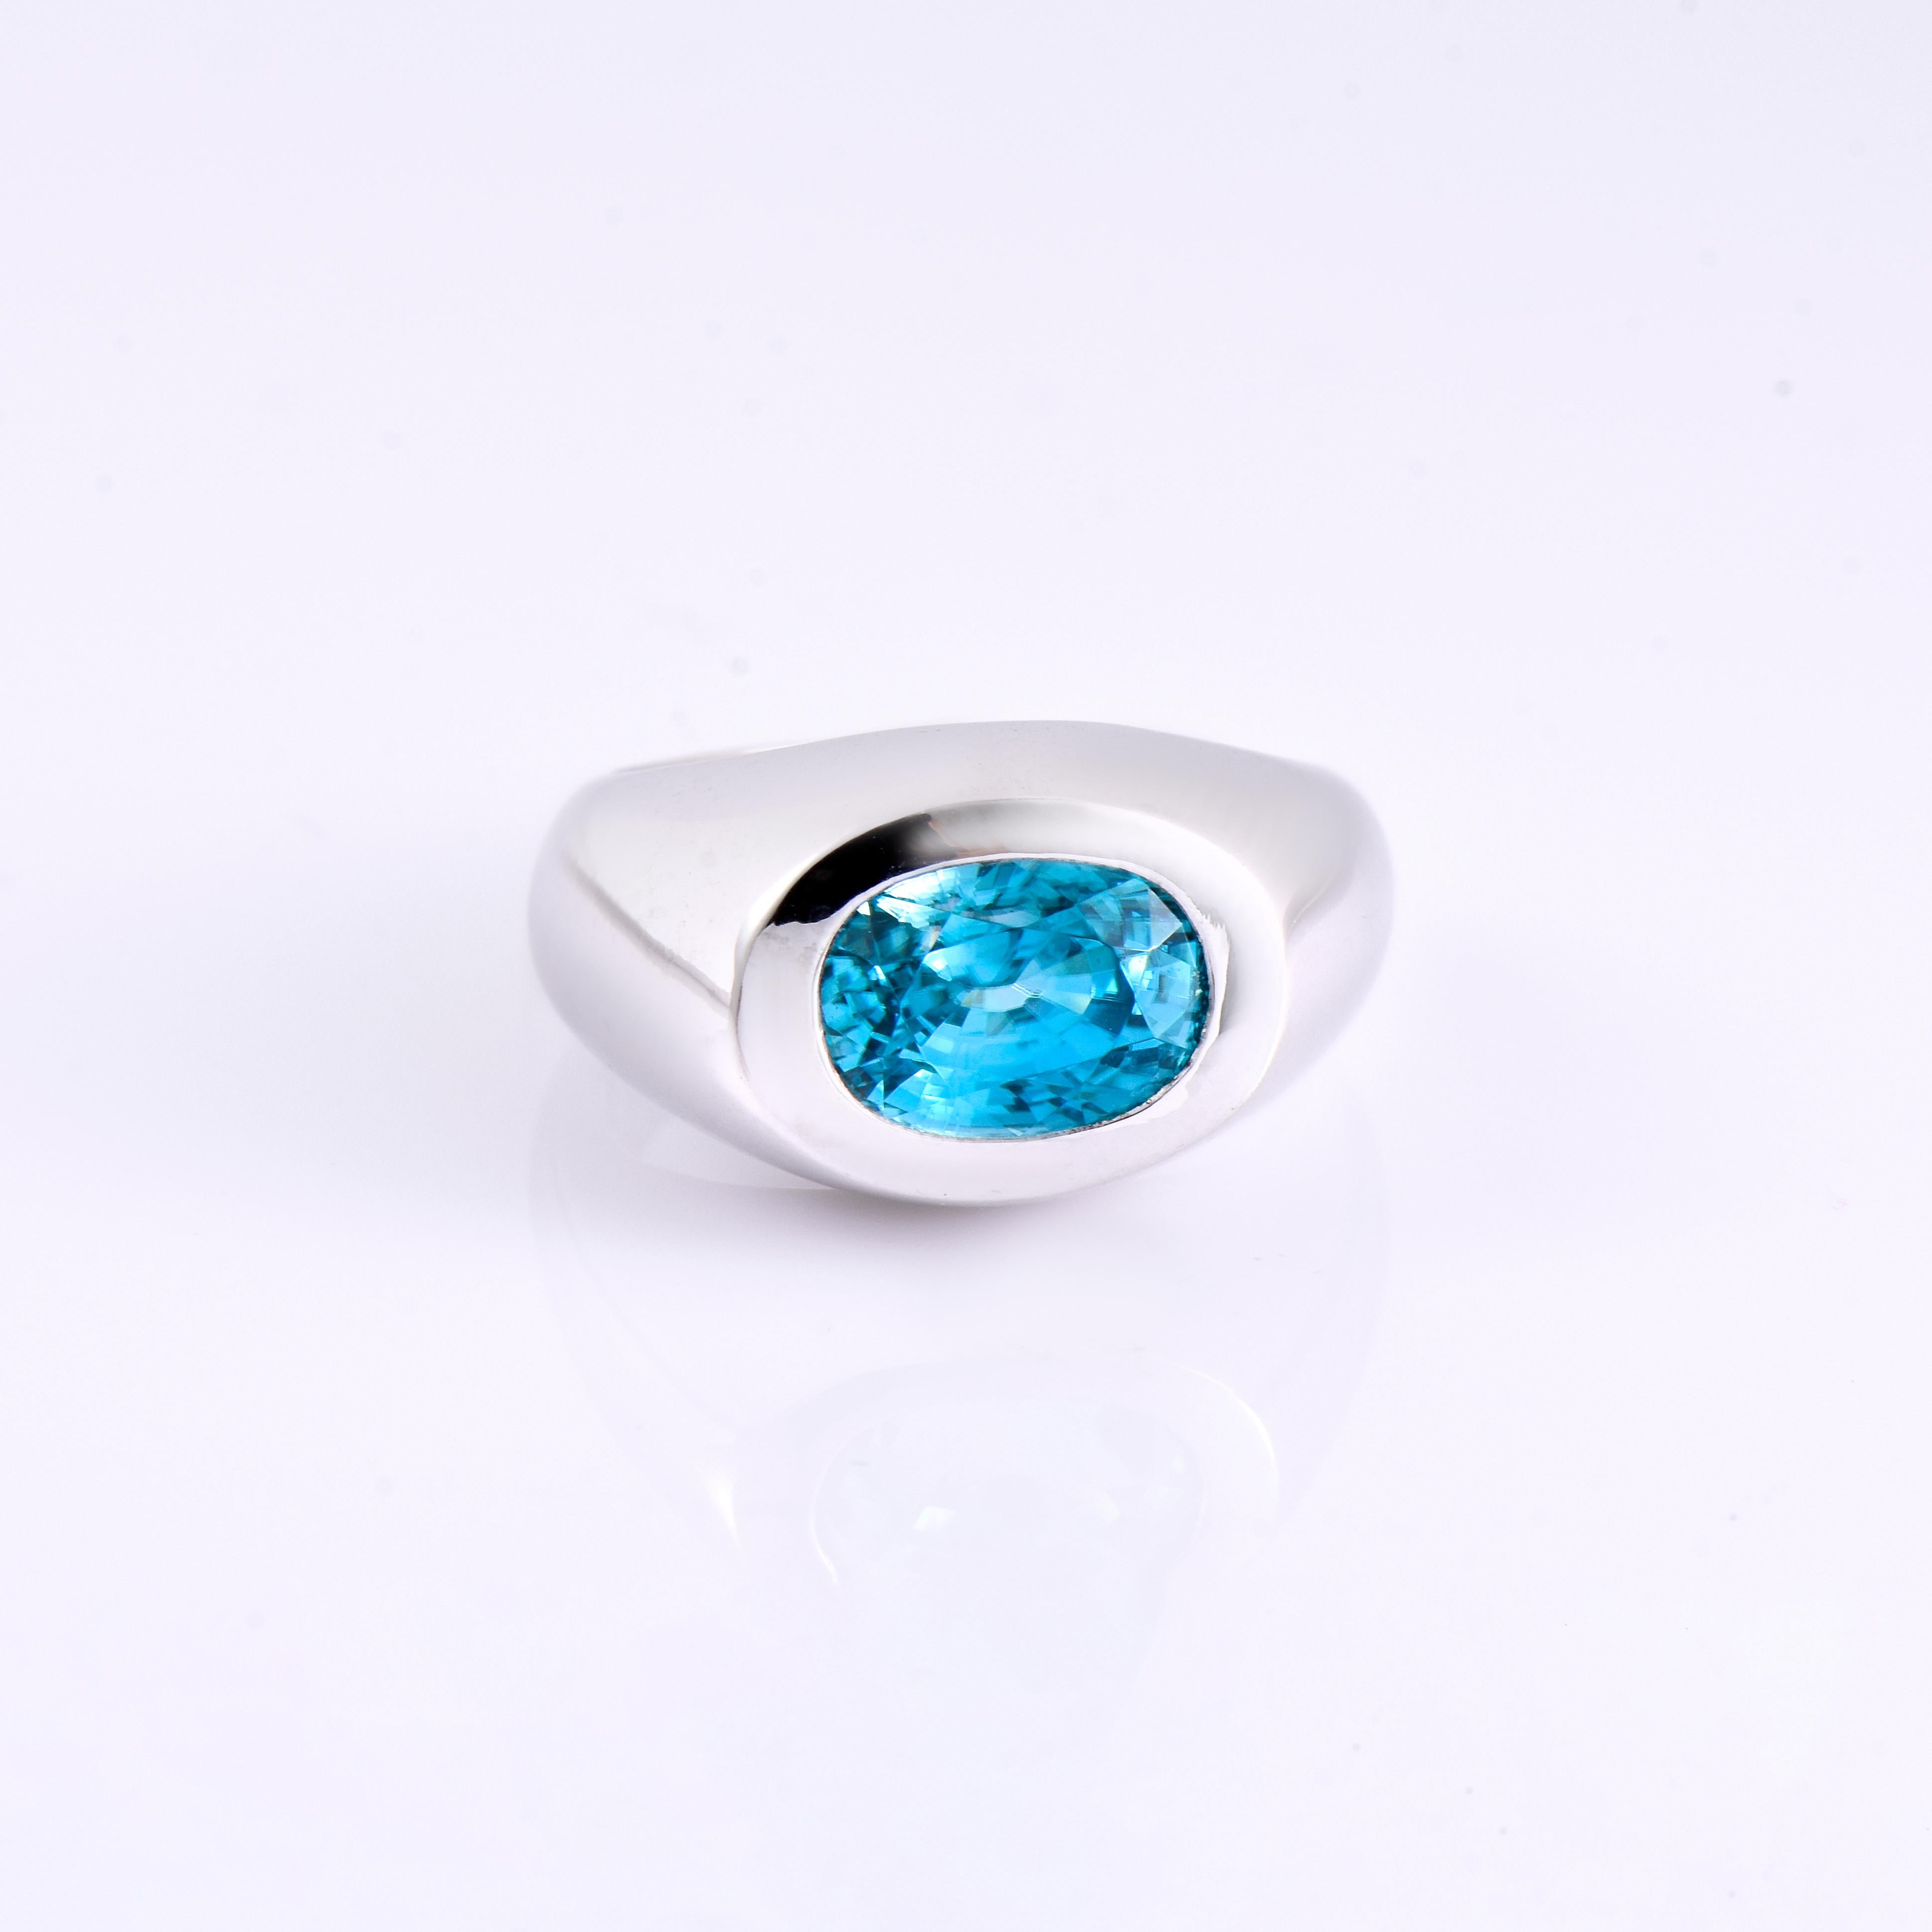 Orloff of Denmark; 925 Sterling Silver Ring set with a 5.92 carat Natural Cambodian Blue Zircon.

This piece has been meticulously hand-crafted out of 925 sterling silver.
In the center sits a fantastic 5.92 carat blue zircon mined, polished and cut